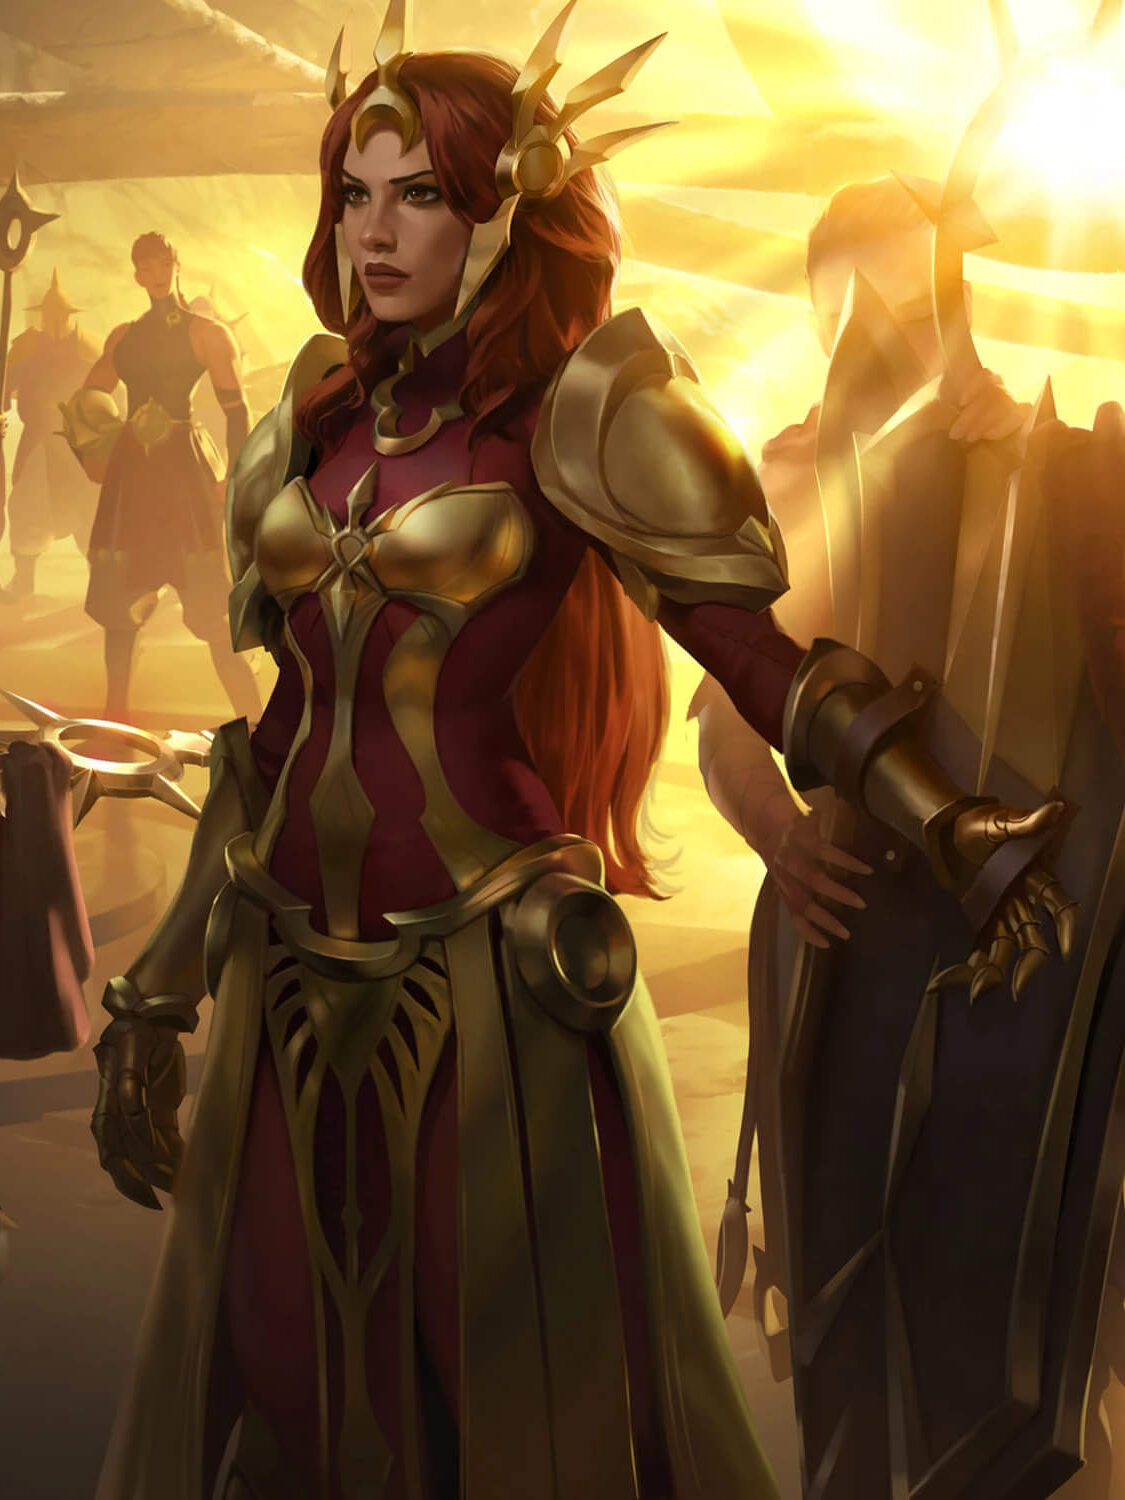 Leona, the Aspect of the Sun leads the Solari faction in Targon. She is being provided her regalia, the Zenith Blade and the Shield of Daybreak